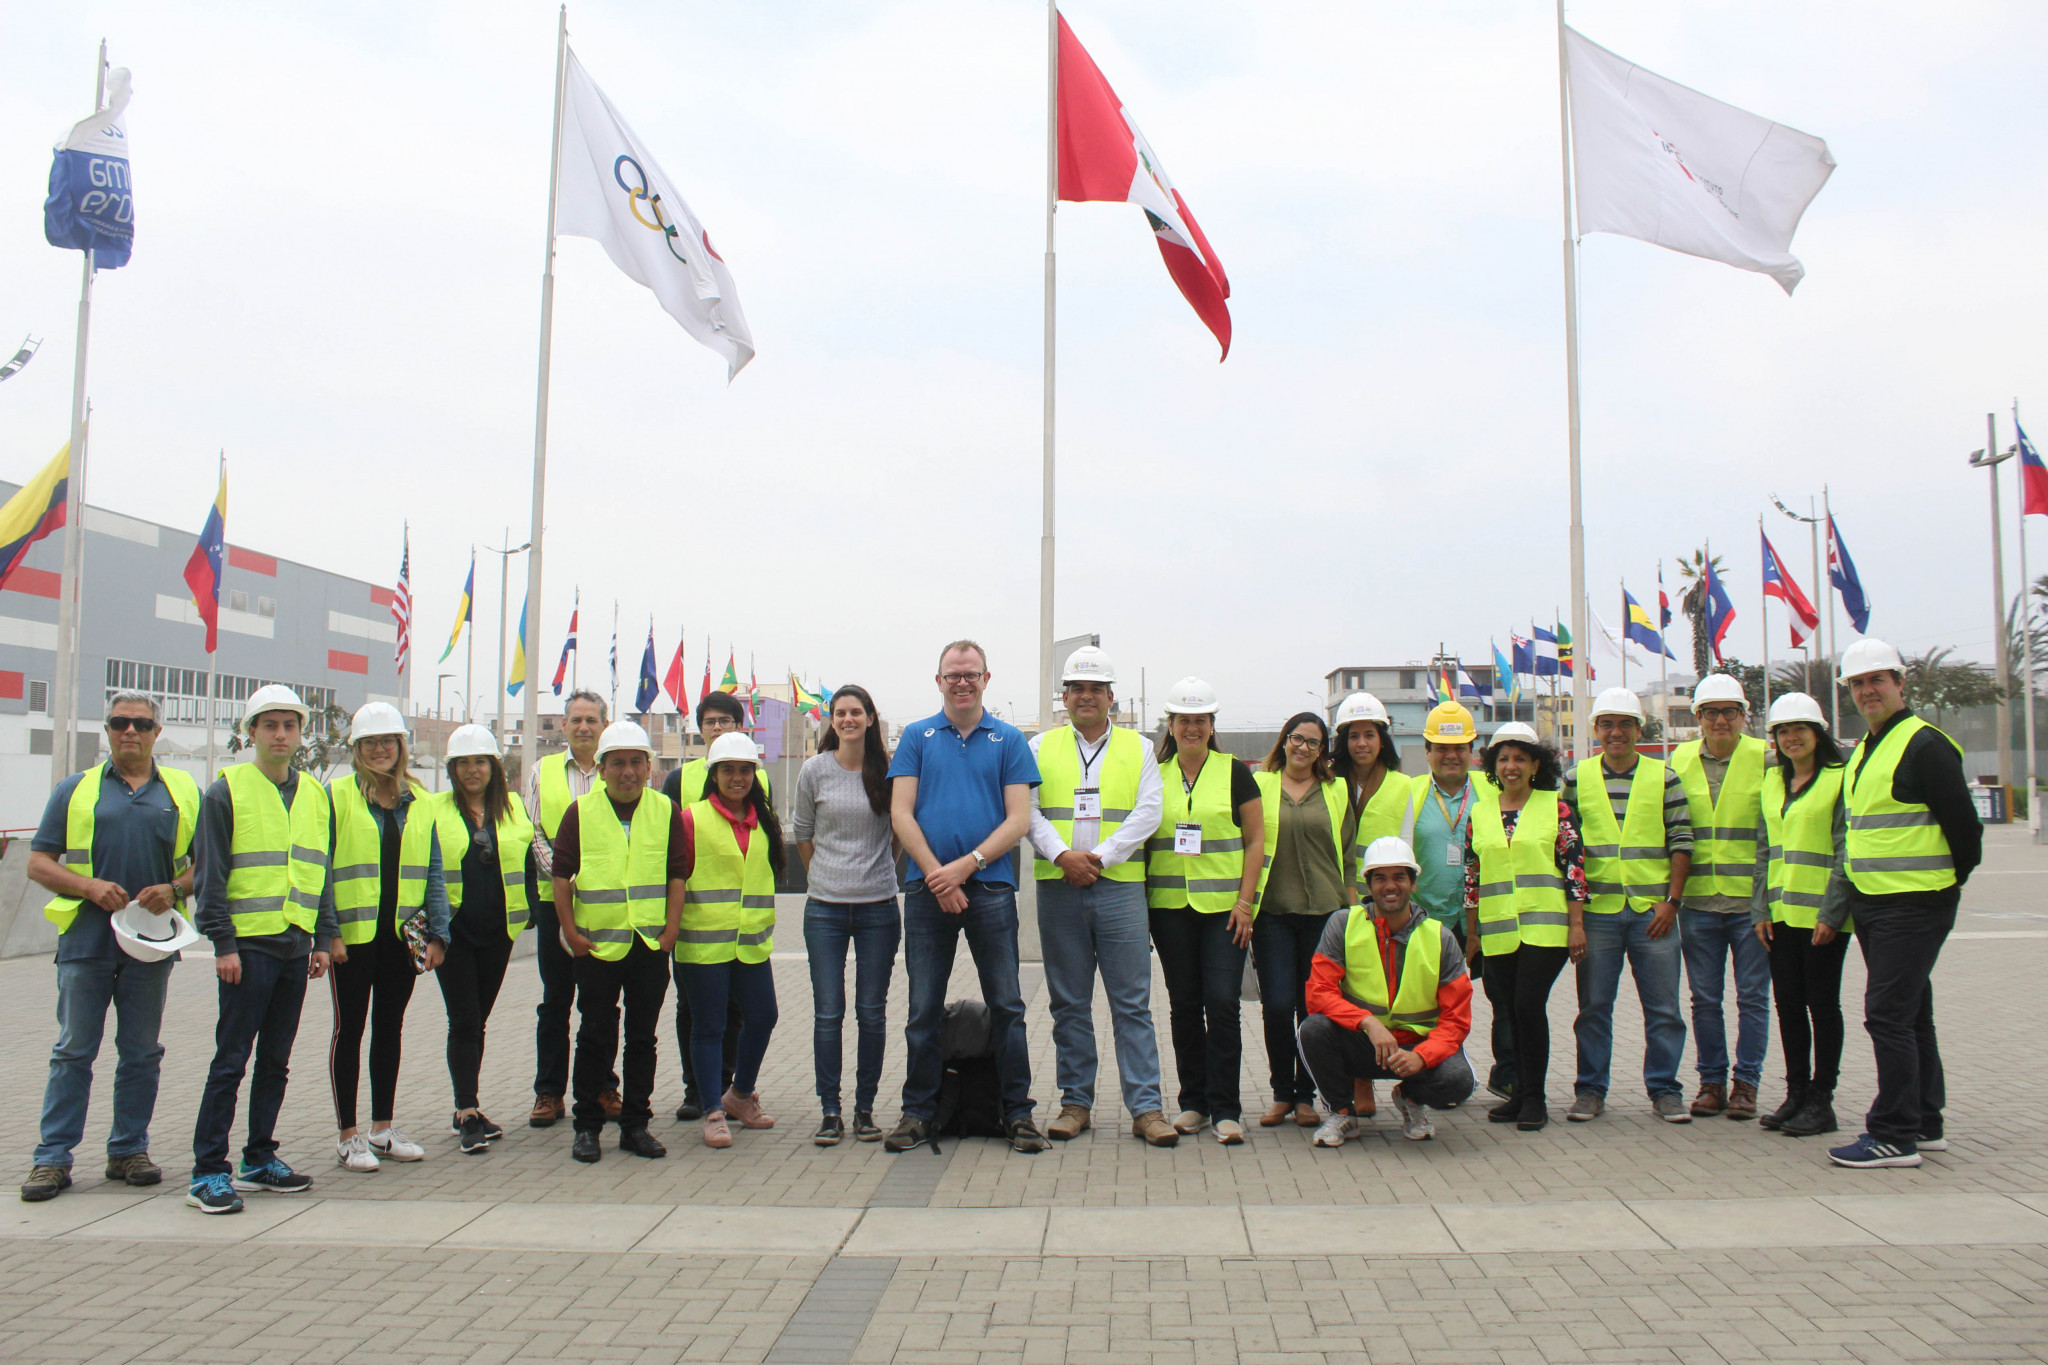 The awareness workshop was organised to promote Para sport and Paralympic events to local and global journalists expected to cover the 2019 Parapan American Games in Lima  ©Lima 2019